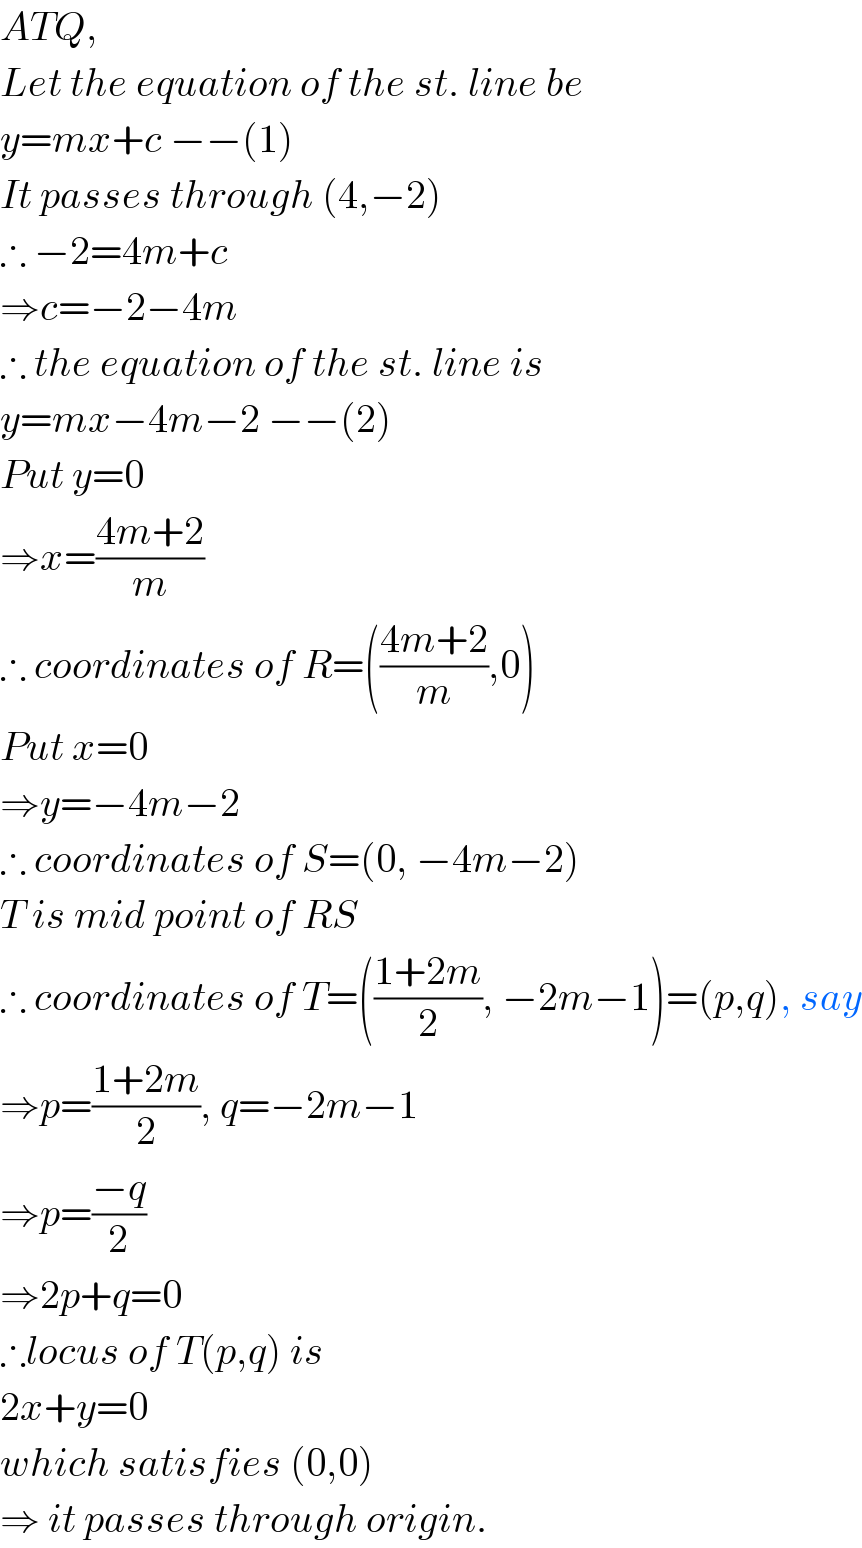 ATQ,  Let the equation of the st. line be  y=mx+c −−(1)  It passes through (4,−2)  ∴ −2=4m+c  ⇒c=−2−4m  ∴ the equation of the st. line is  y=mx−4m−2 −−(2)  Put y=0  ⇒x=((4m+2)/m)  ∴ coordinates of R=(((4m+2)/m),0)  Put x=0  ⇒y=−4m−2  ∴ coordinates of S=(0, −4m−2)  T is mid point of RS  ∴ coordinates of T=(((1+2m)/2), −2m−1)=(p,q), say  ⇒p=((1+2m)/2), q=−2m−1  ⇒p=((−q)/2)  ⇒2p+q=0  ∴locus of T(p,q) is  2x+y=0  which satisfies (0,0)  ⇒ it passes through origin.  